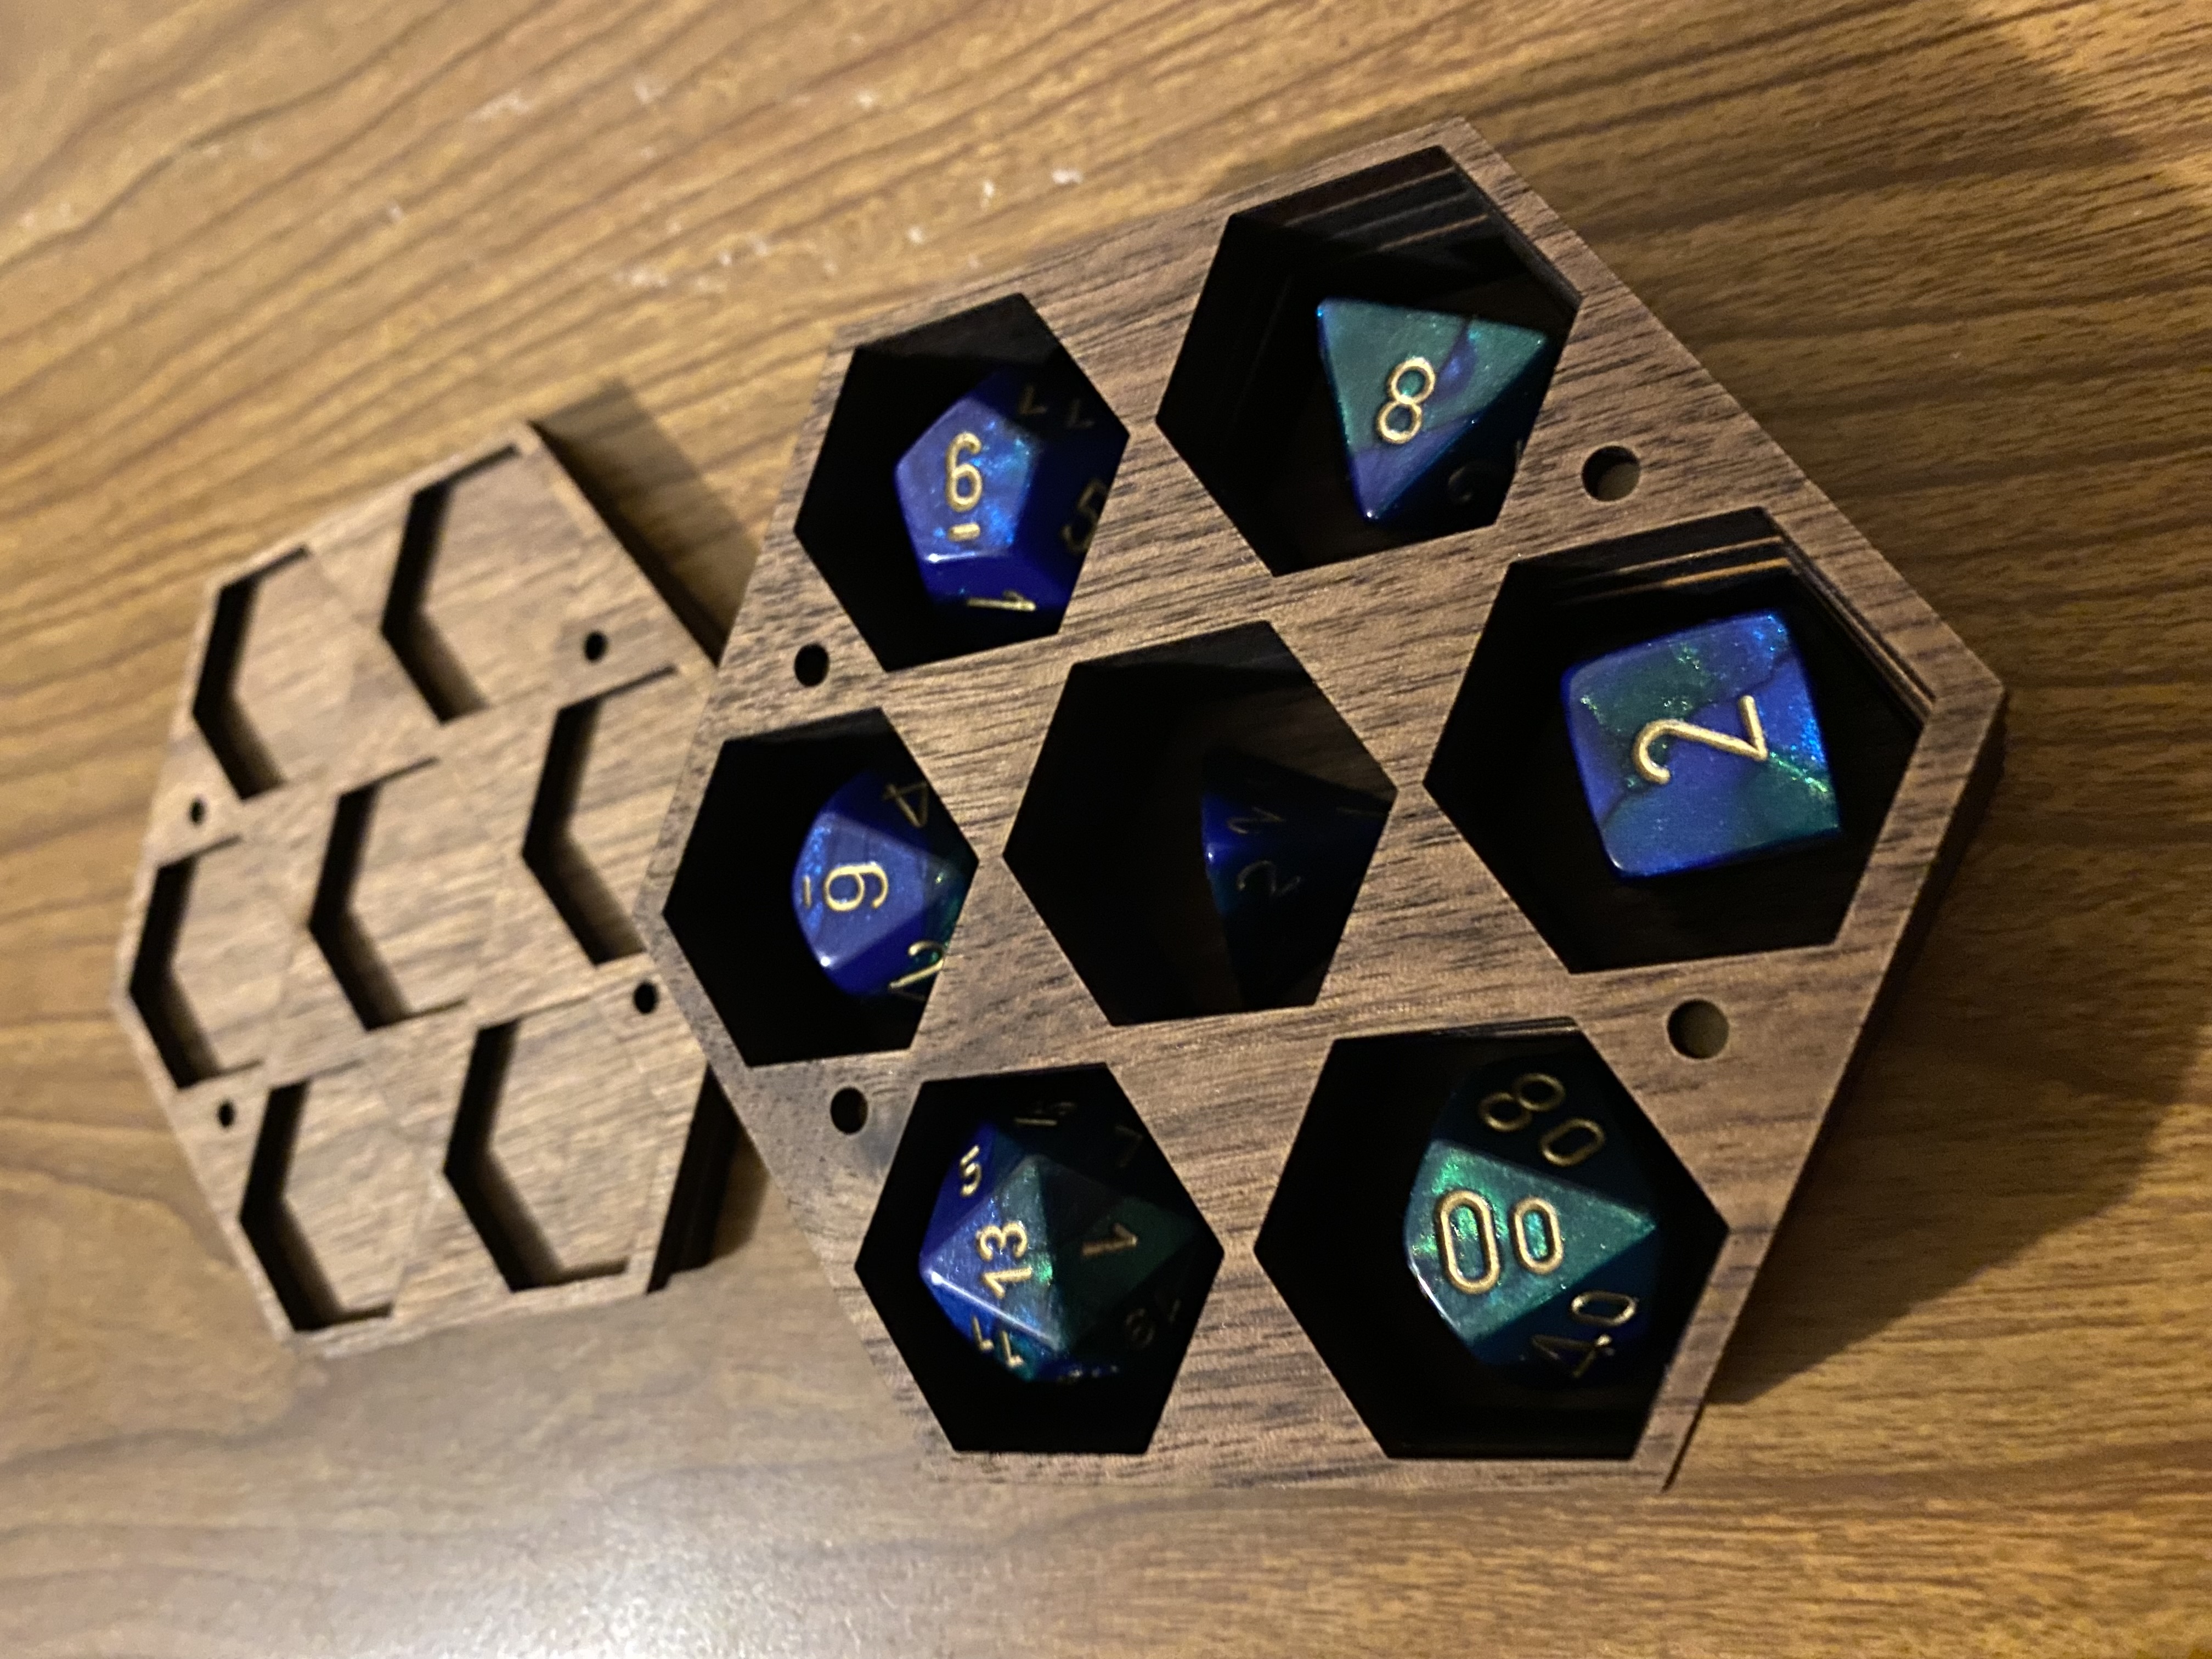 inside of the dice hexagon tray